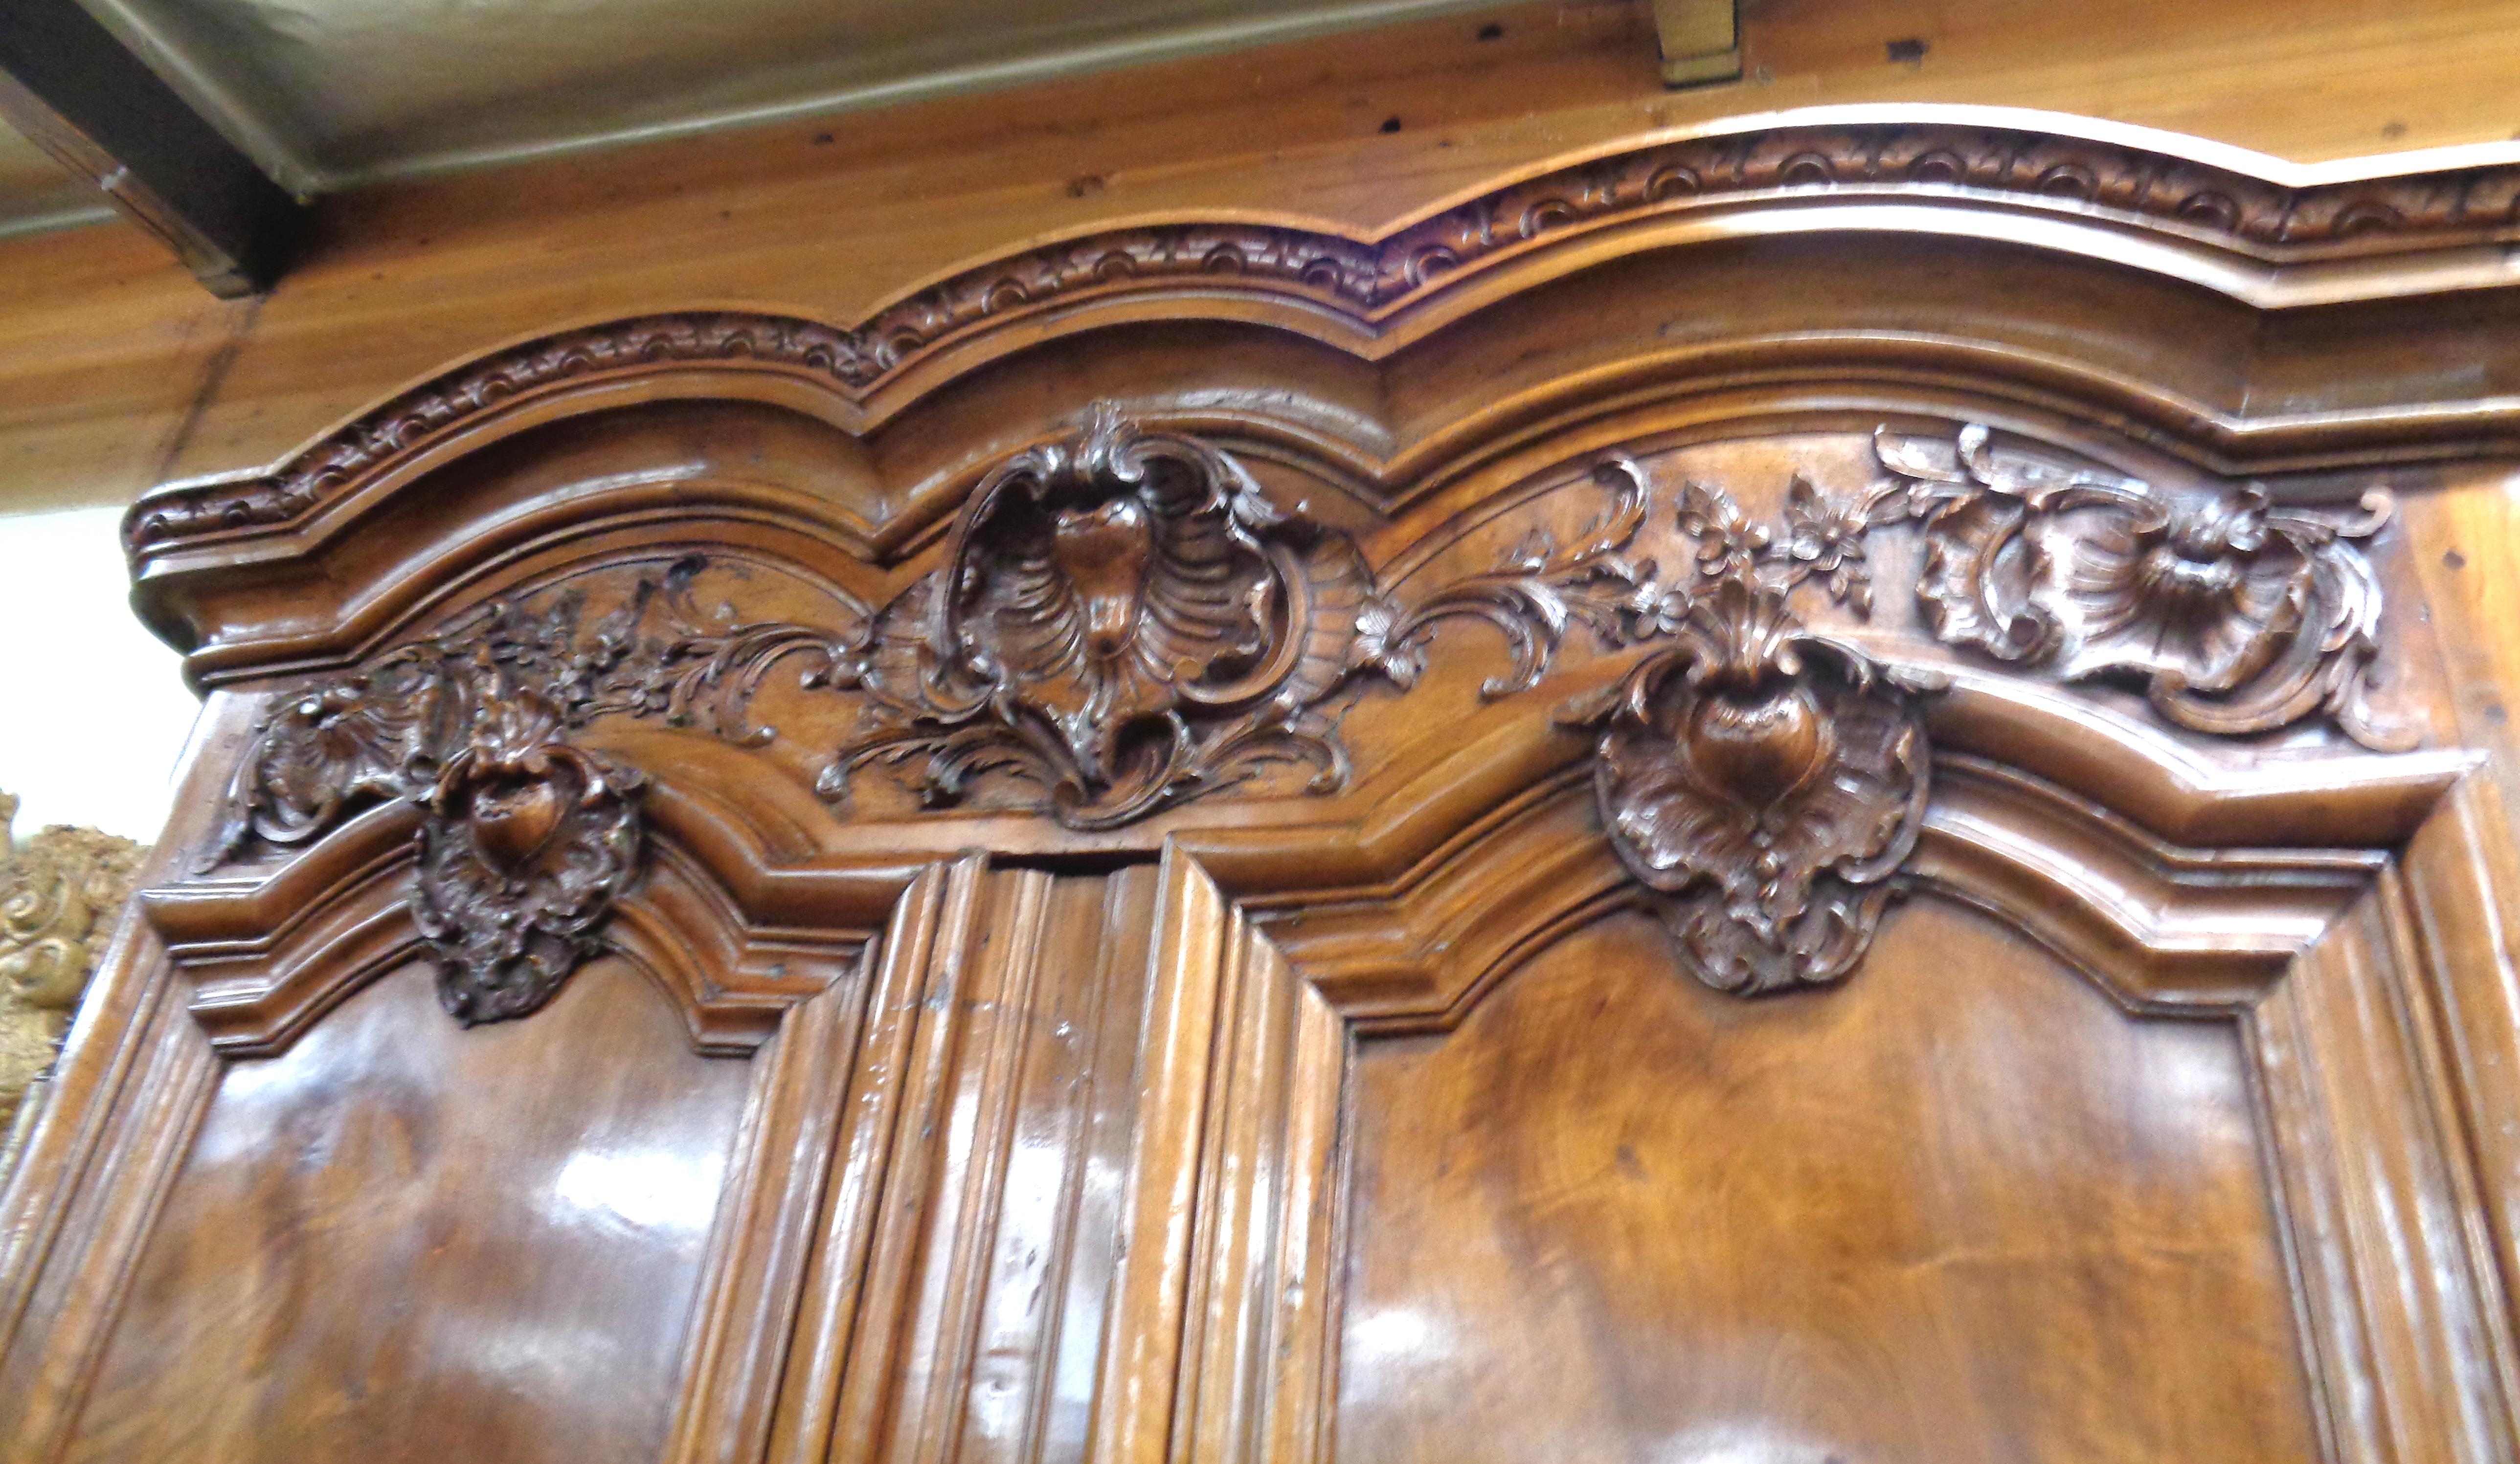 French Chateau carved walnut Lyonnaise armoire with a highly stylized cornice at the top. There is magnificent three dimensional carving below the cornice and a deeply carved coquille in the center. The doors are made of matched walnut and have